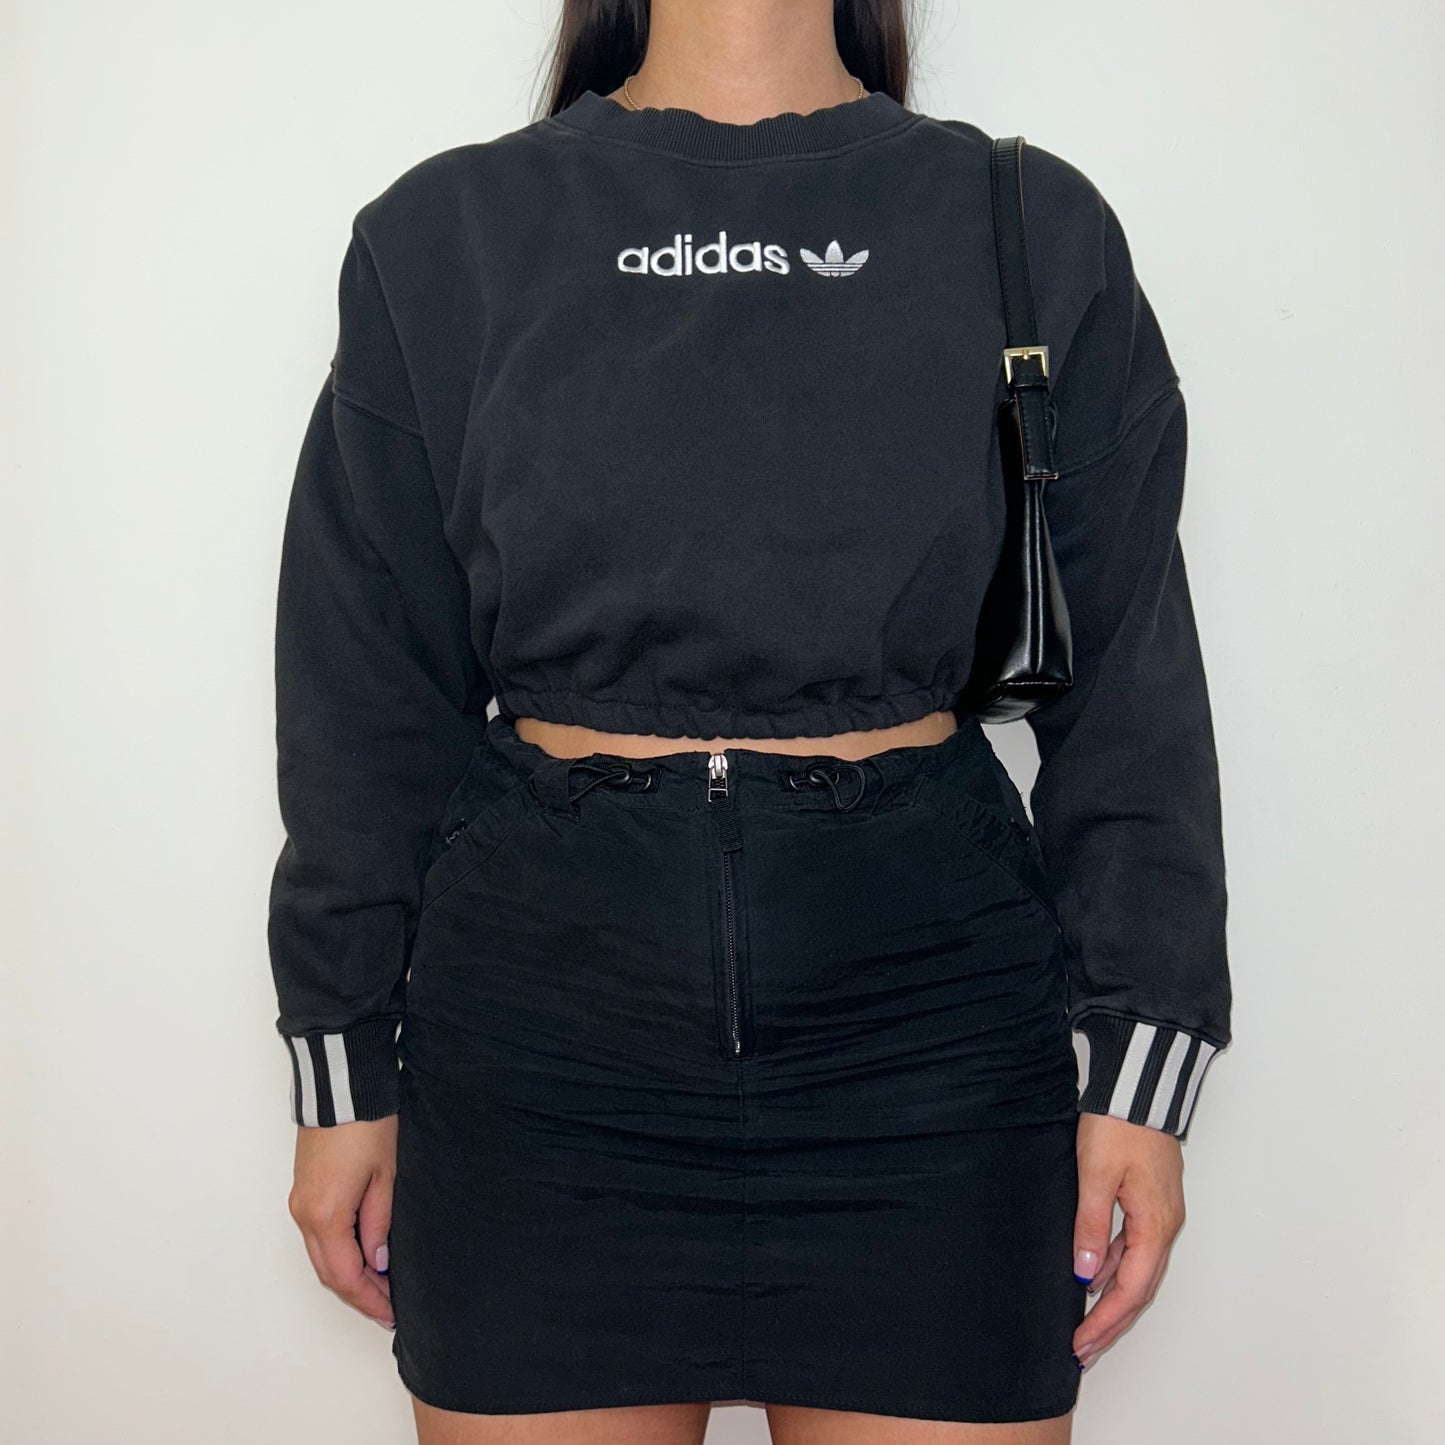 black cropped sweatshirt with white adidas logo shown on a model wearing a black mini skirt and black shoulder bag